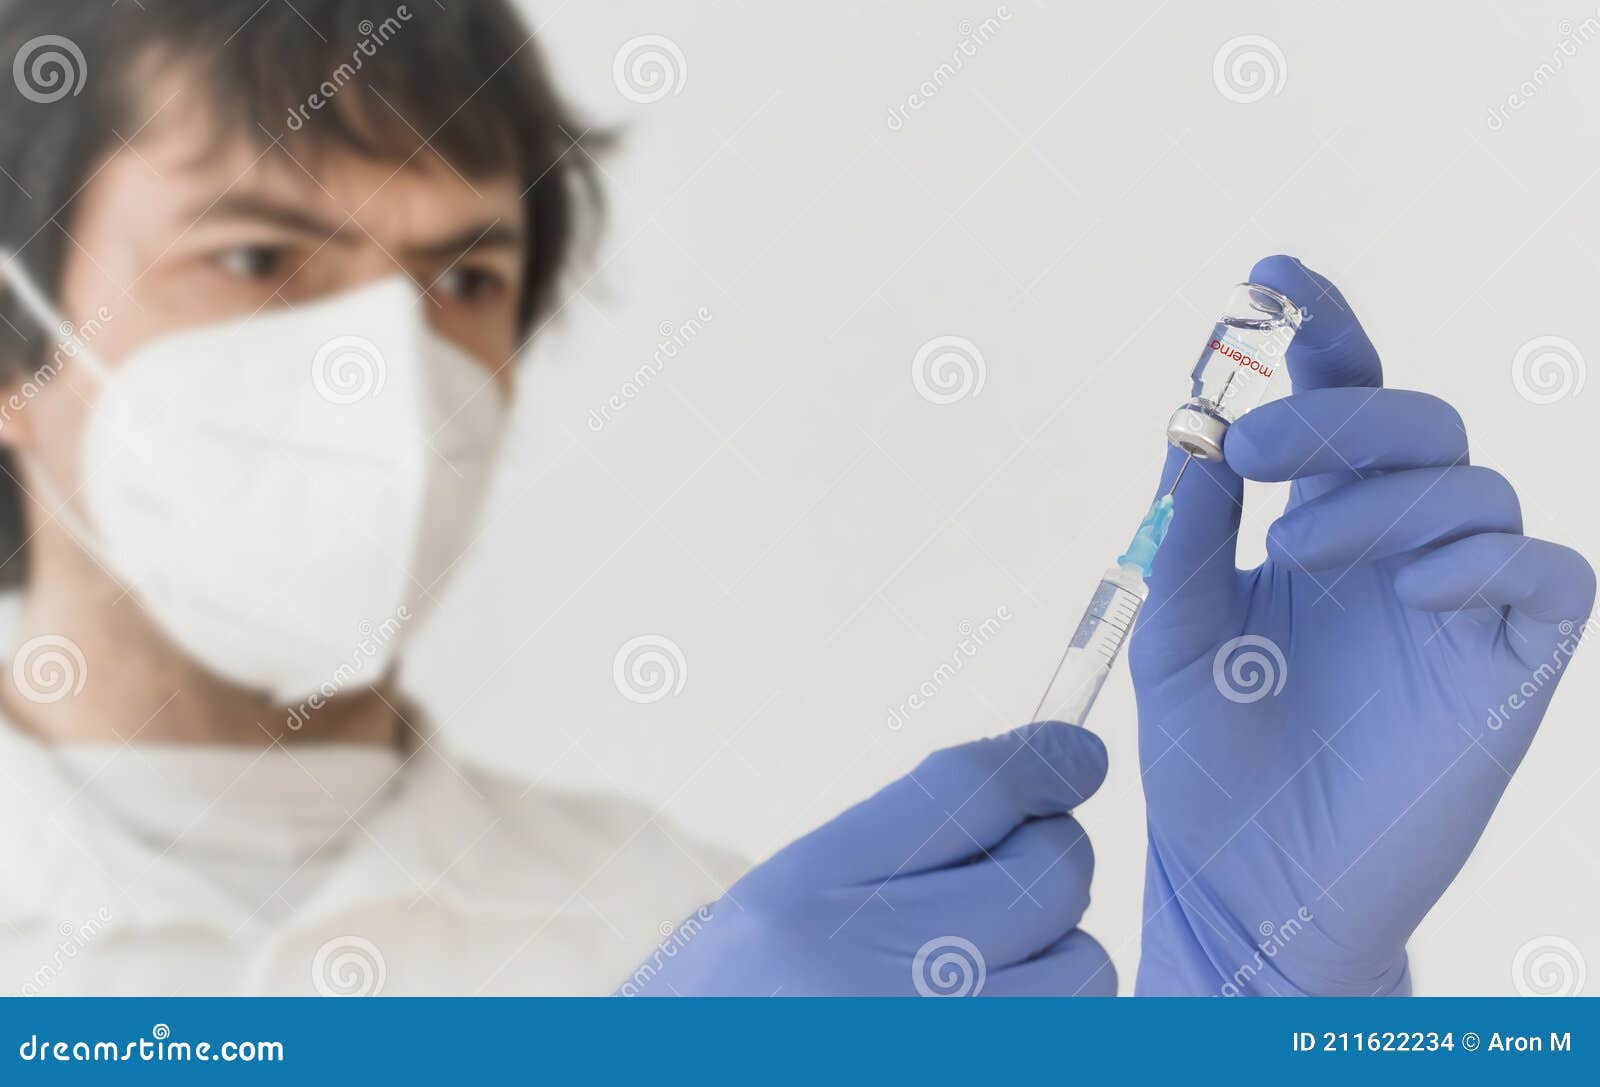 graz,austria-26.01.2021: doctor holding a vaccine bottle and syringe, beginning of mass vaccination with the moderna covid-19